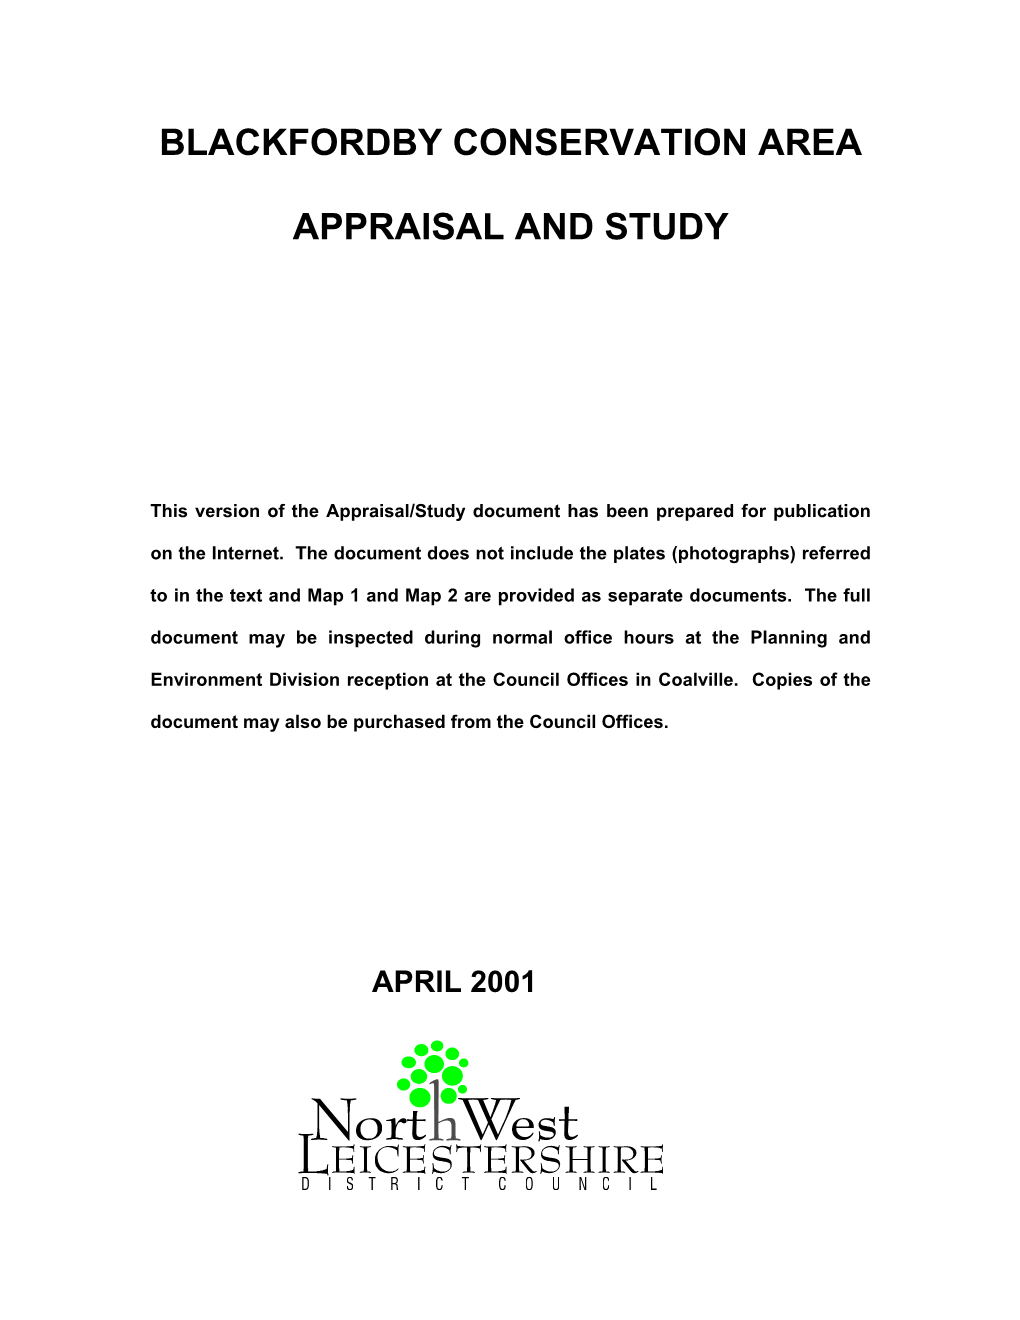 Blackfordby Conservation Area Appraisal and Study